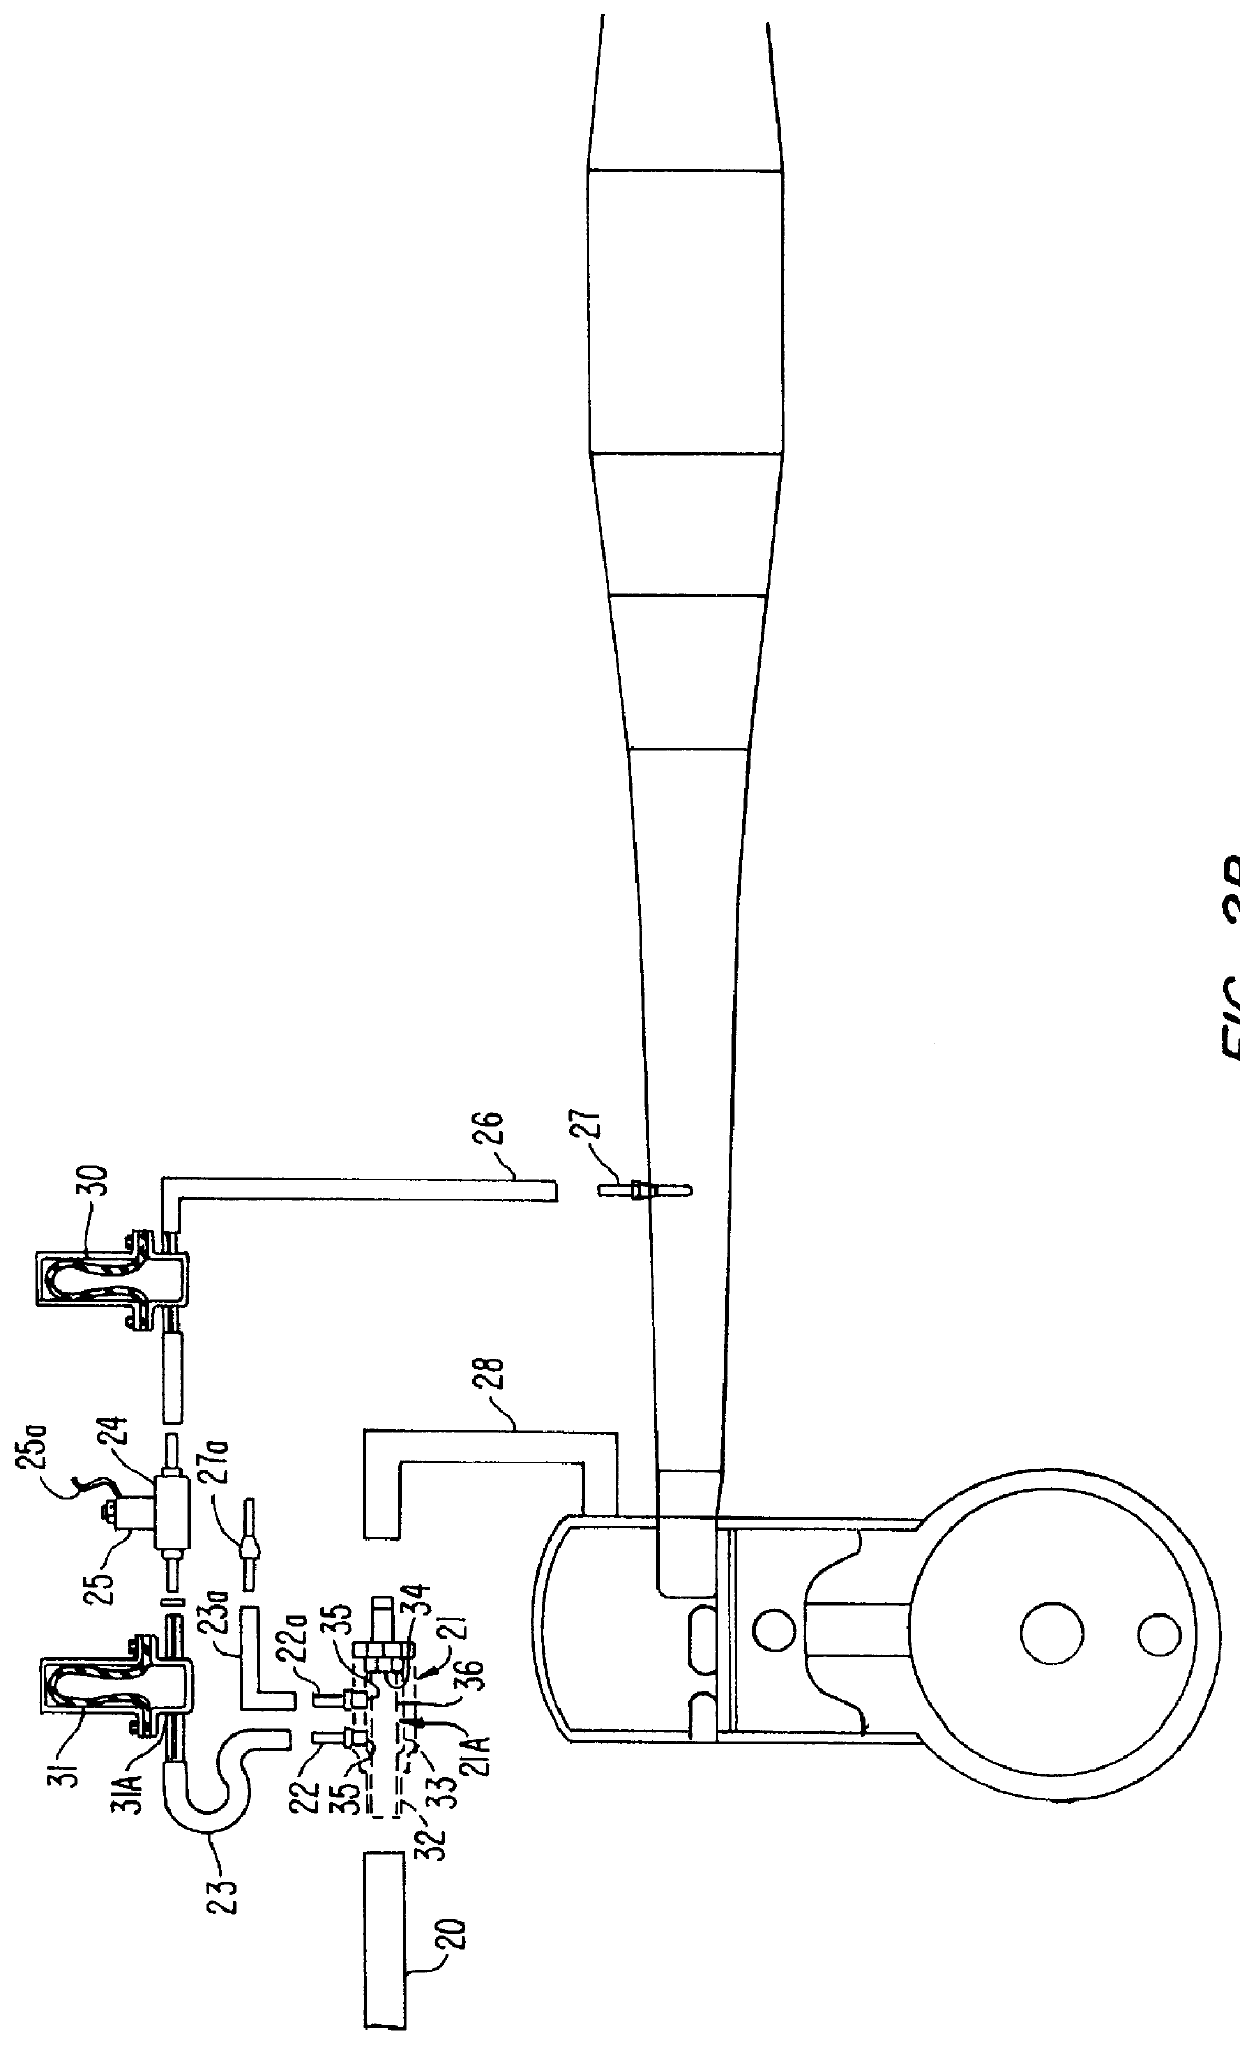 Method and apparatus for improved control of exhaust gas temperature from a two-stroke engine